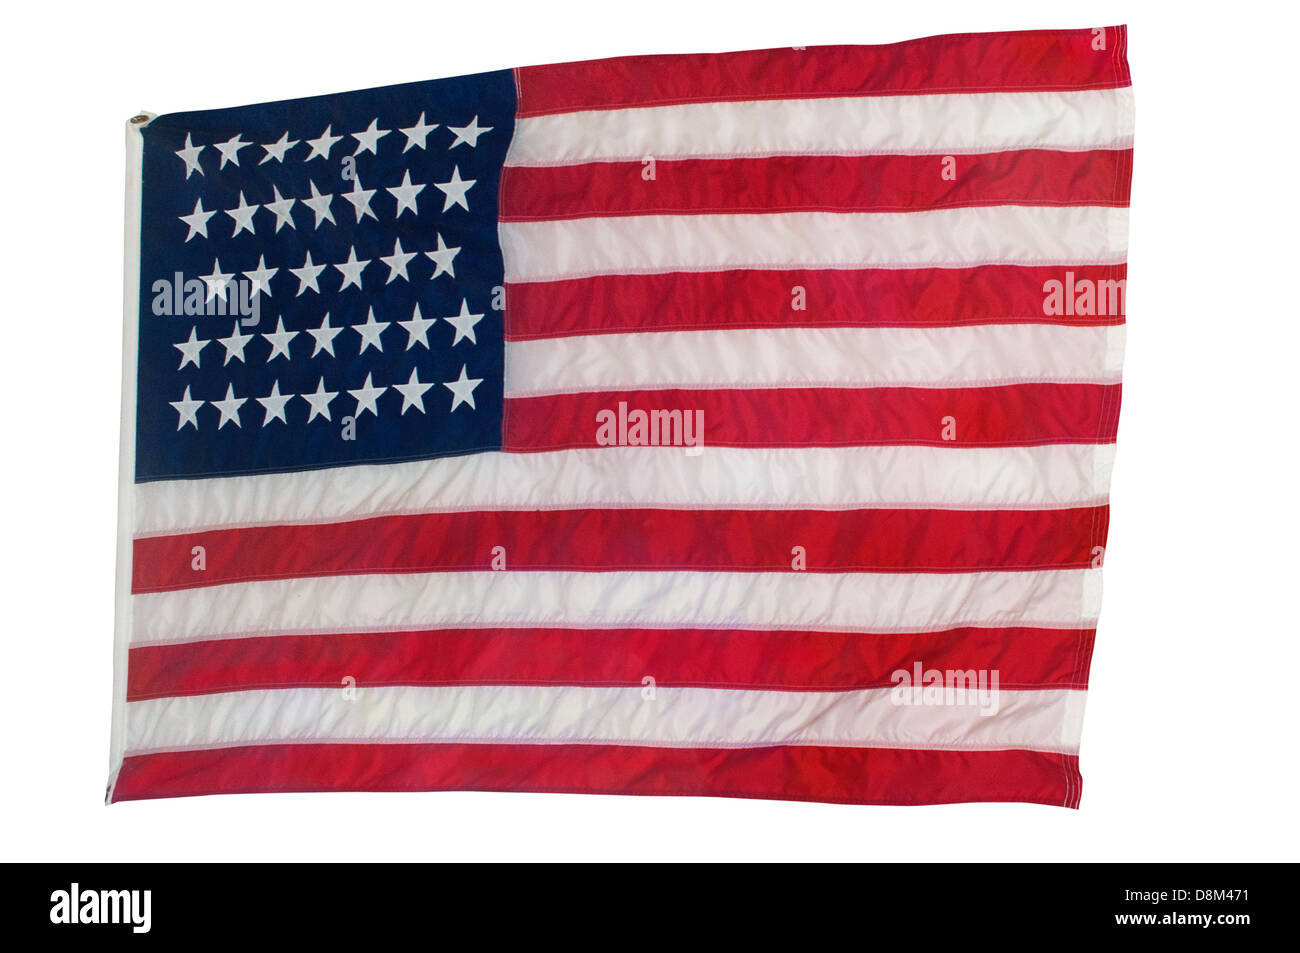 US flag with 34 stars, in effect 1861-1863, Fort Pillow State Park, Tennessee. Digital photograph Stock Photo